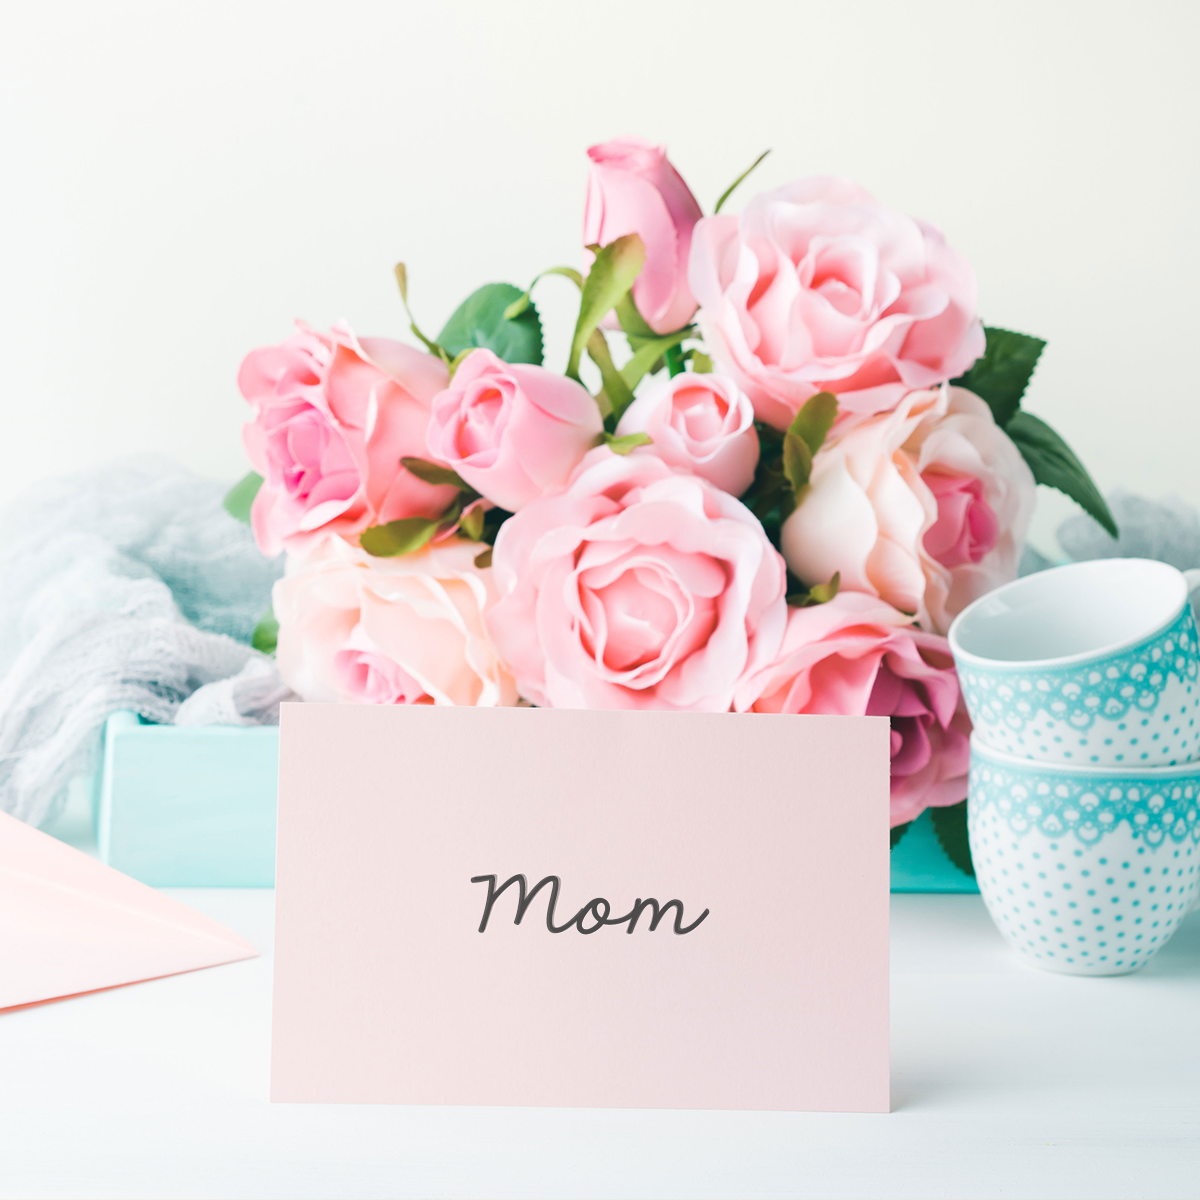 5 Last-Minute Mother’s Day Gifts You Can Pick Up Today